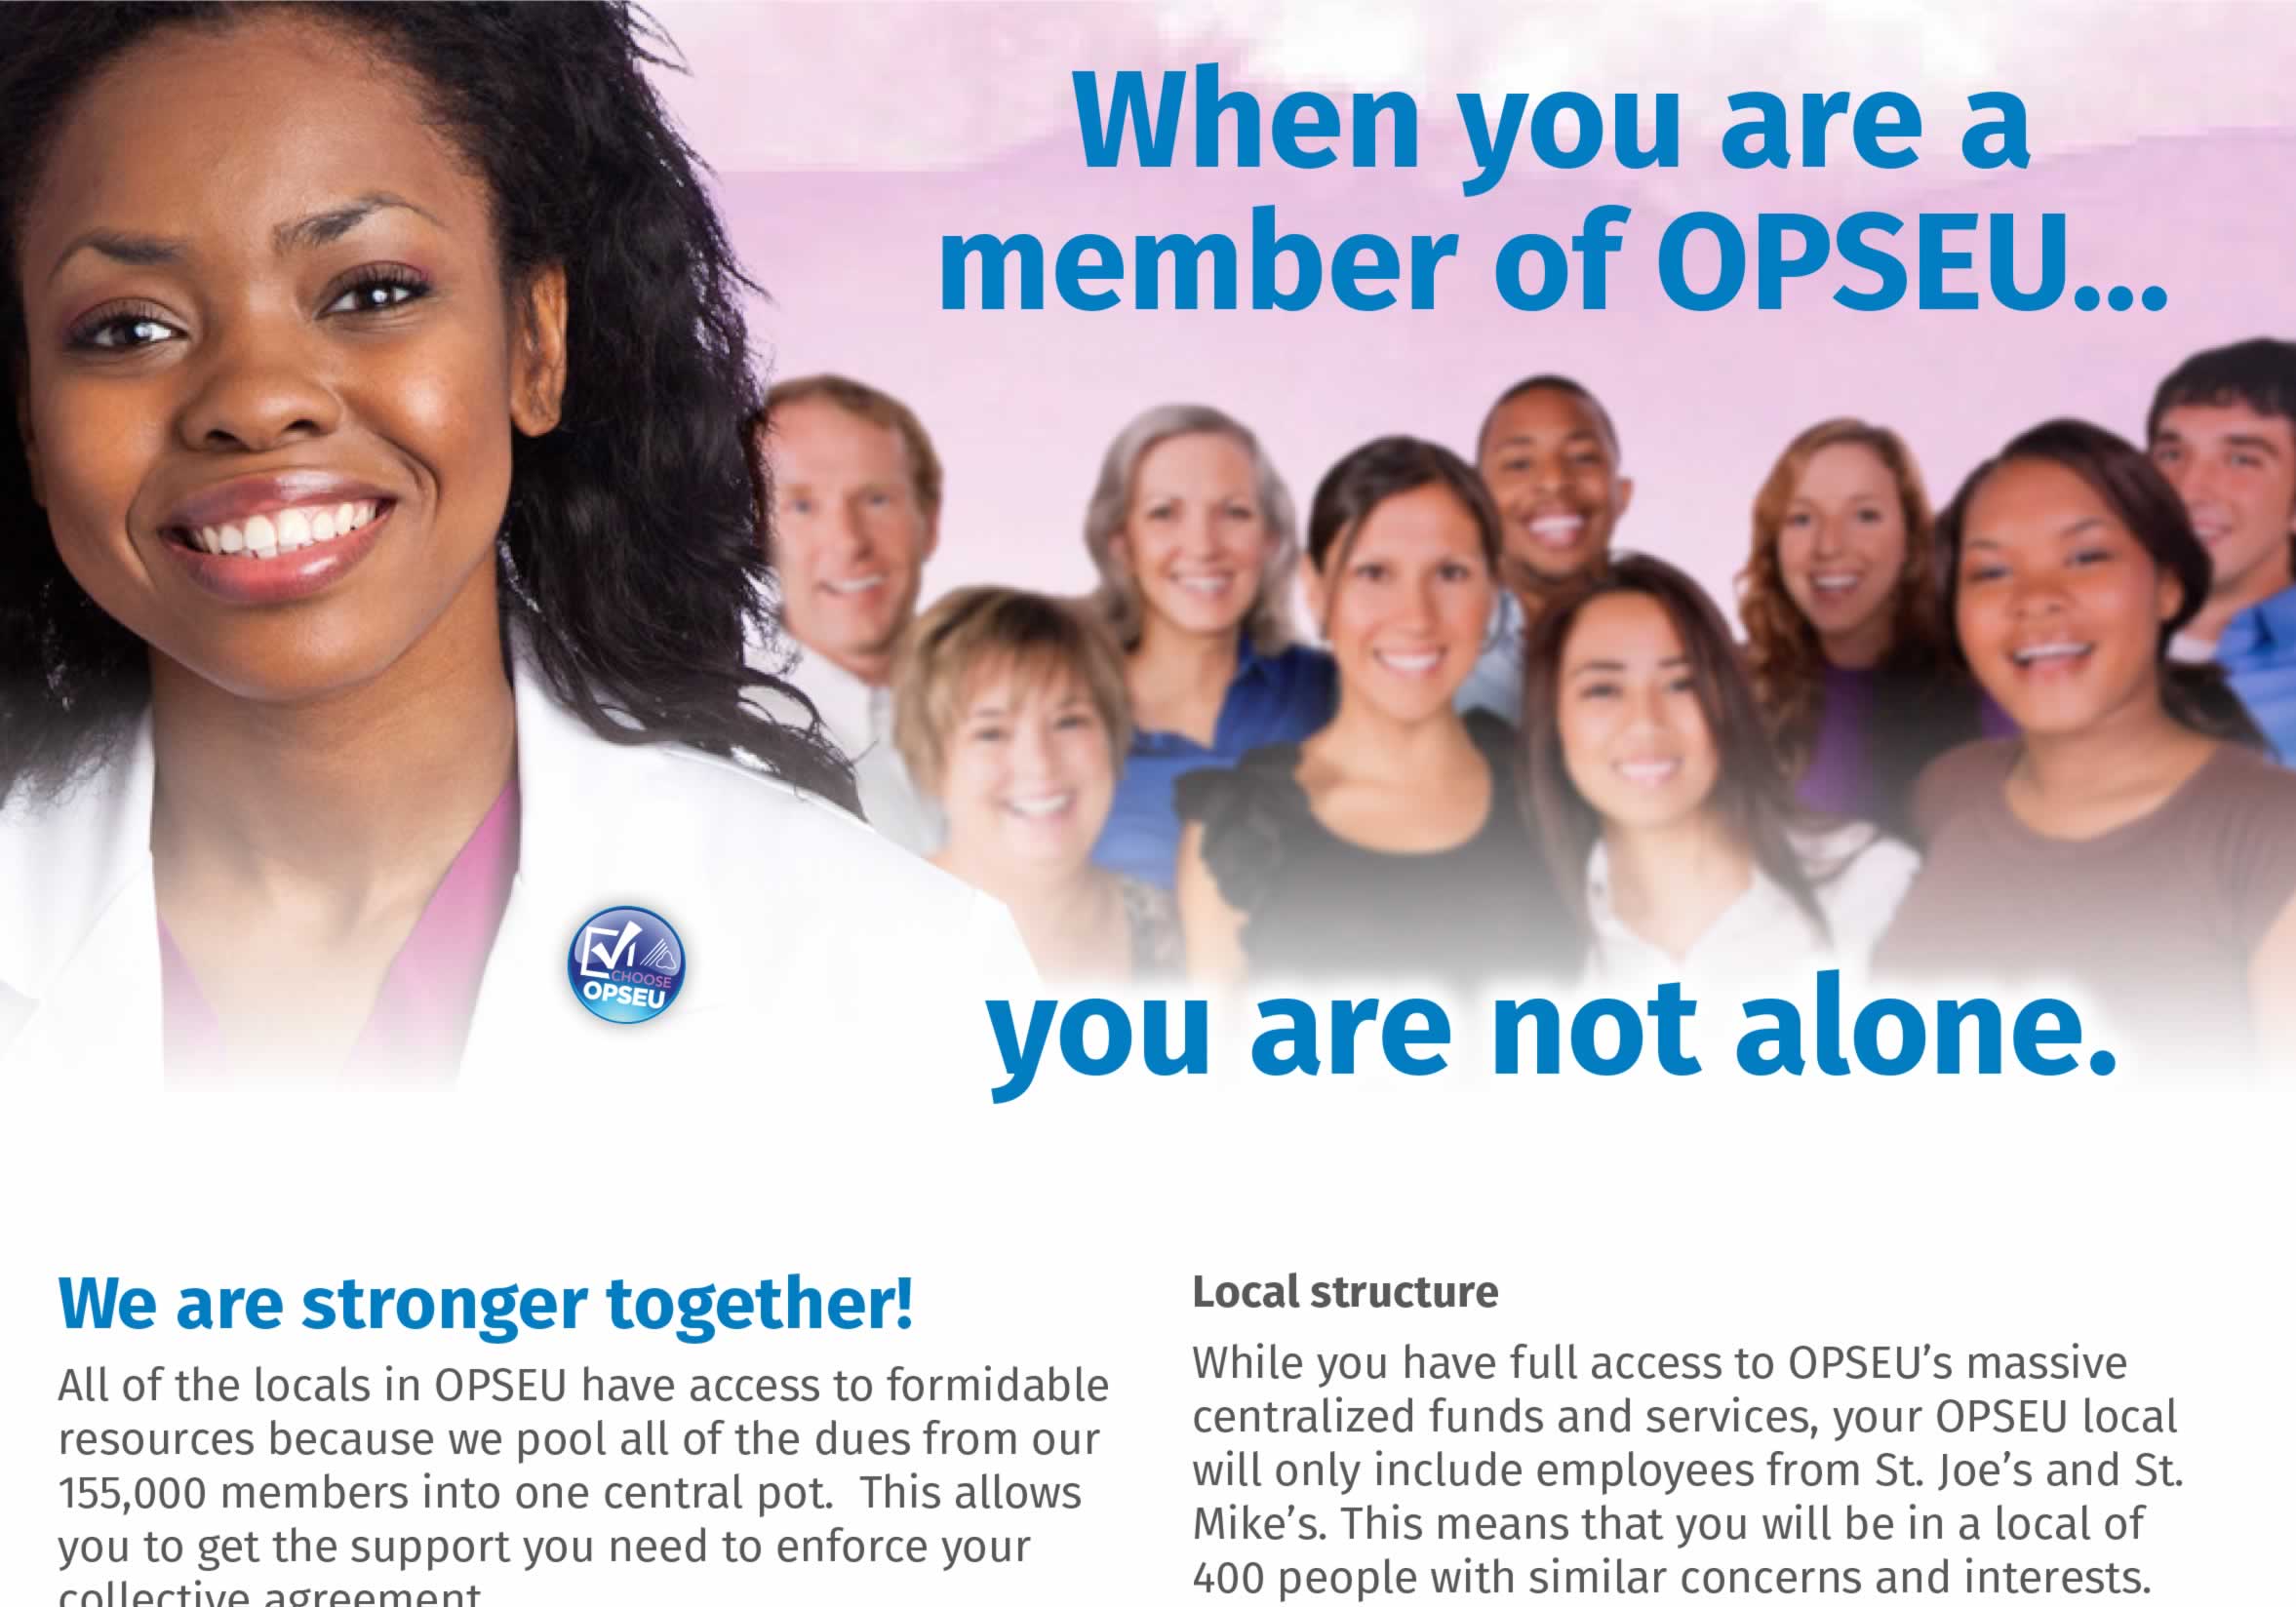 When you are a member of OPSEU, you are not alone.